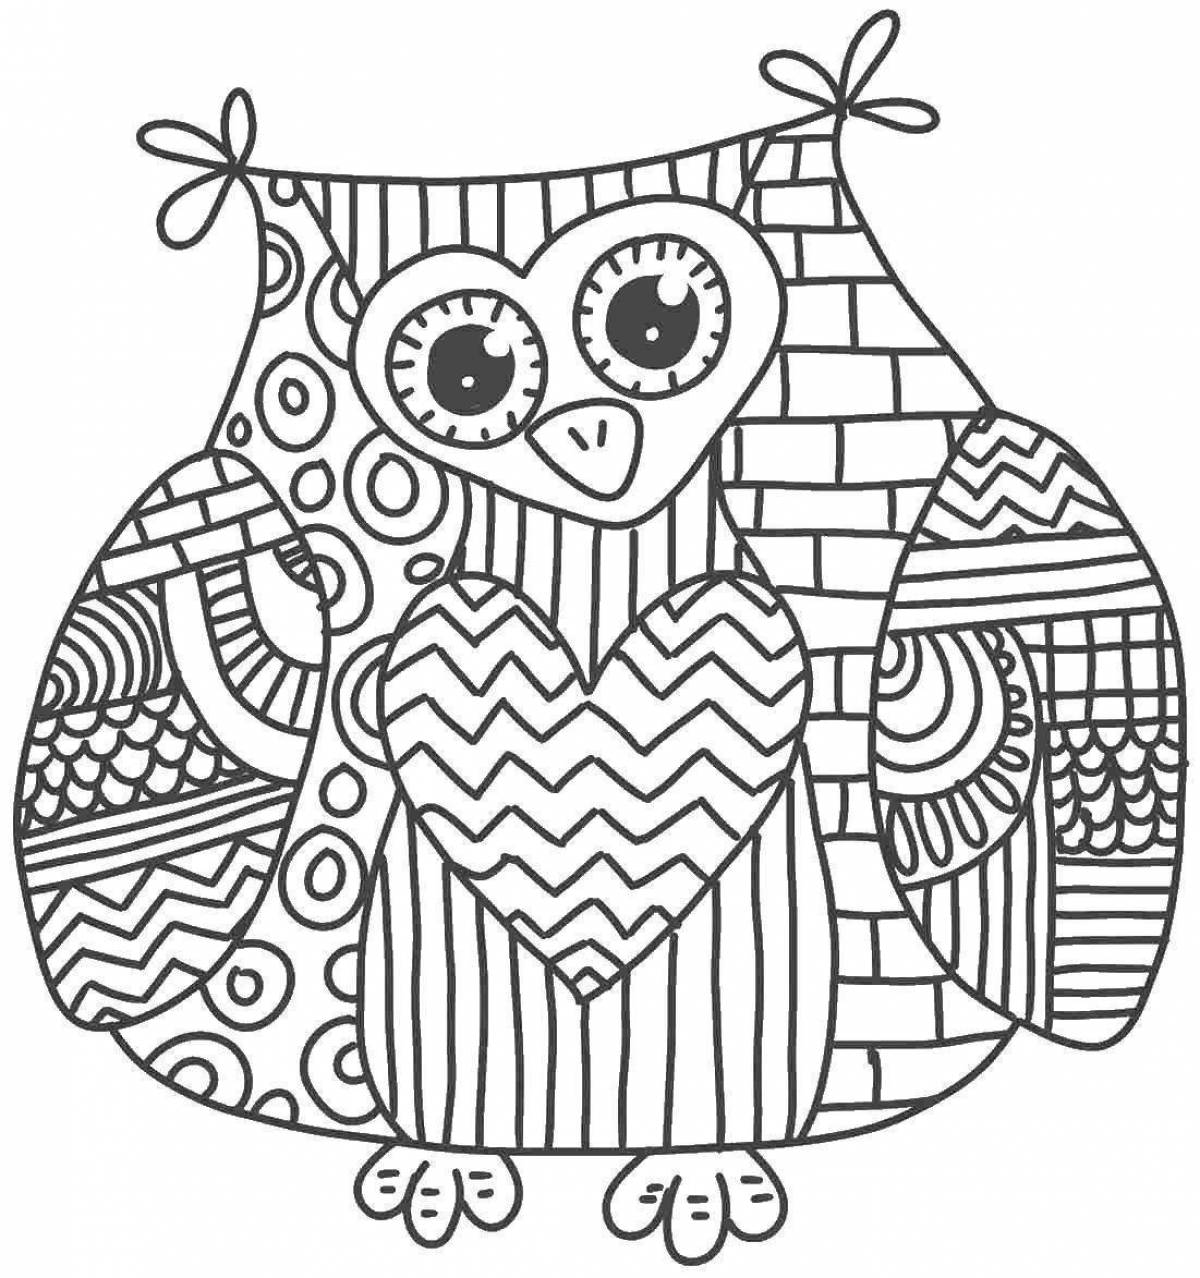 Dazzling owl coloring book